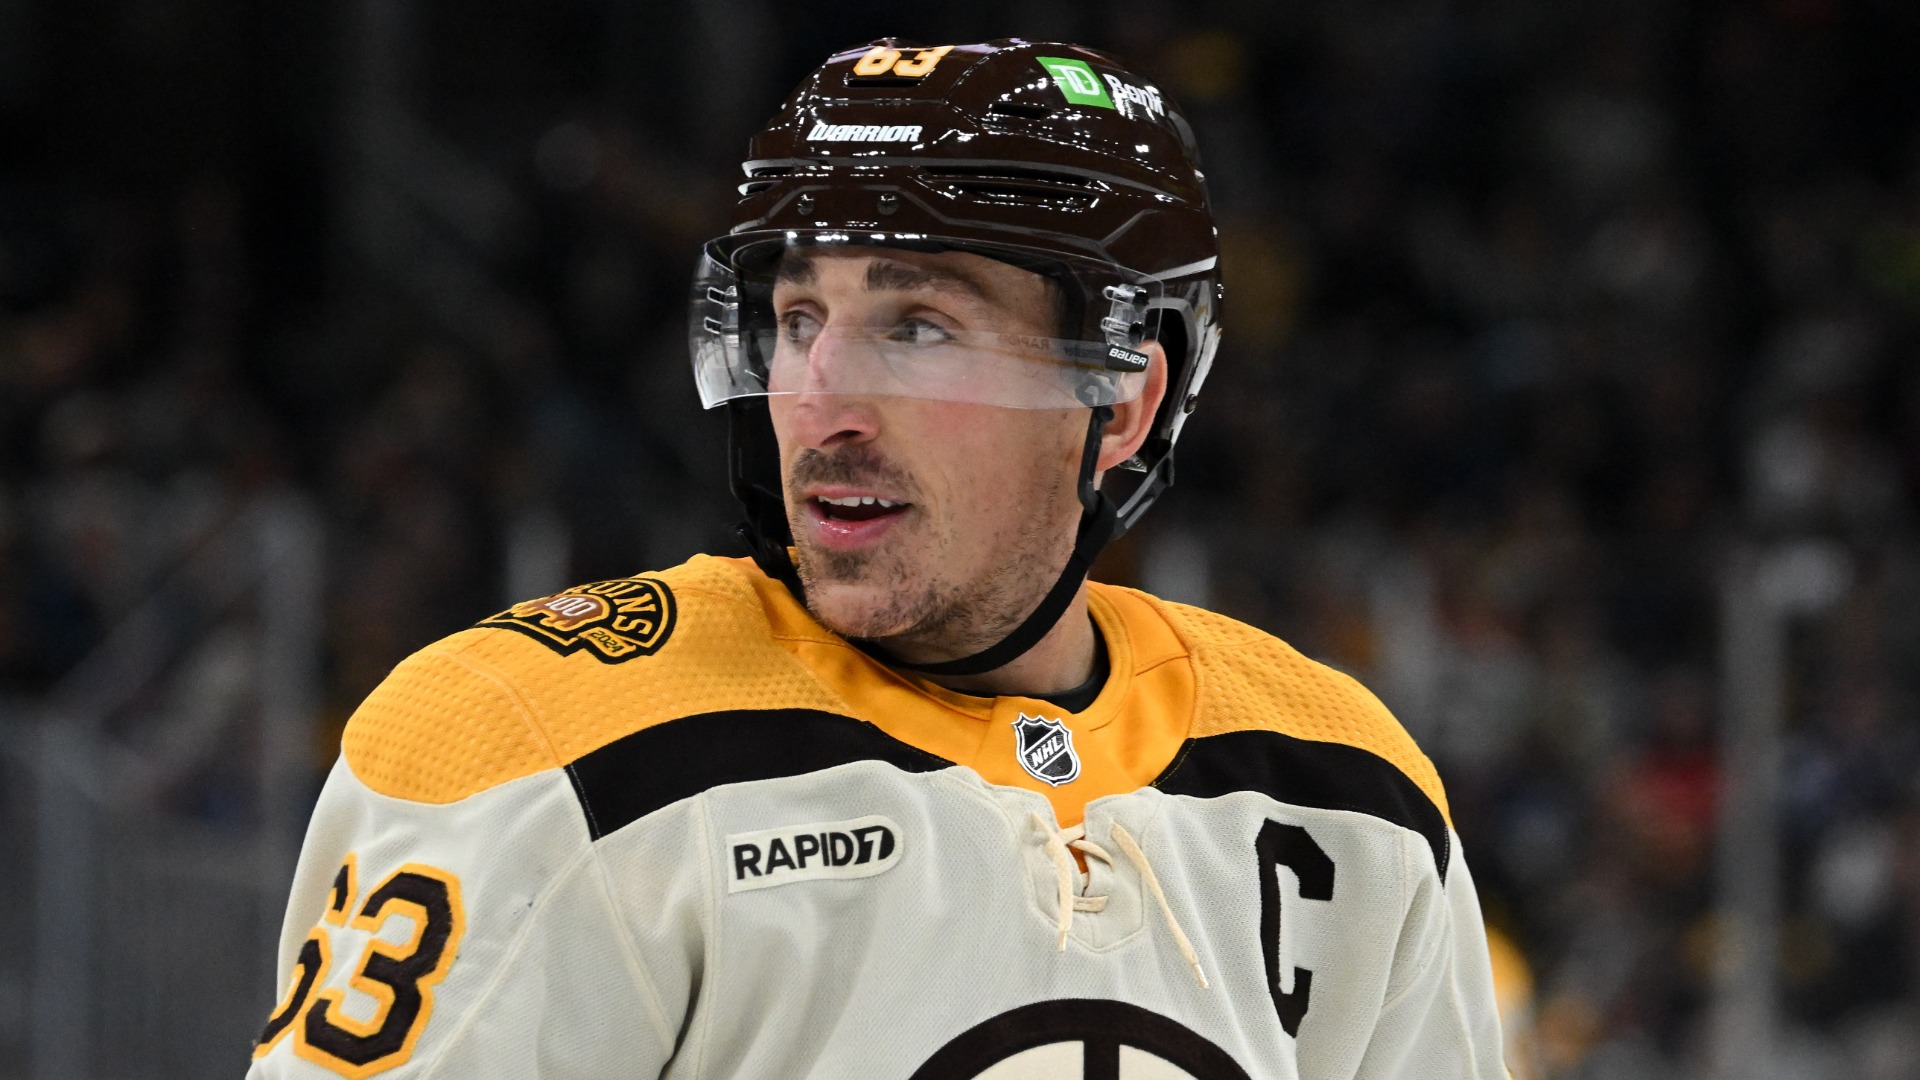 How Jim Montgomery Felt Bruins’ Brad Marchand Fared In Pre-Game 6
Practice